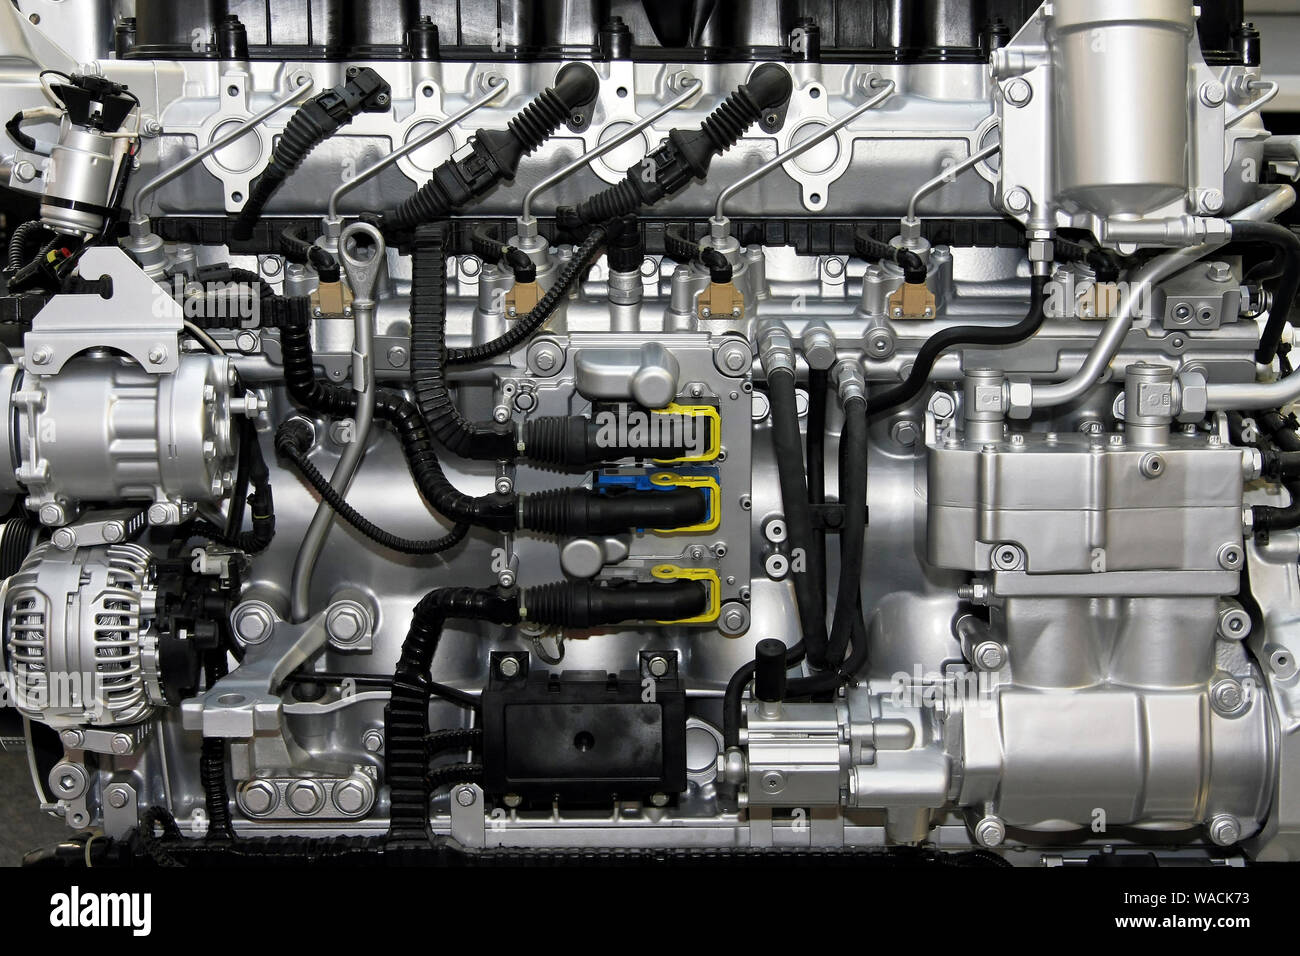 Close up shot of common rail diesel engine Stock Photo